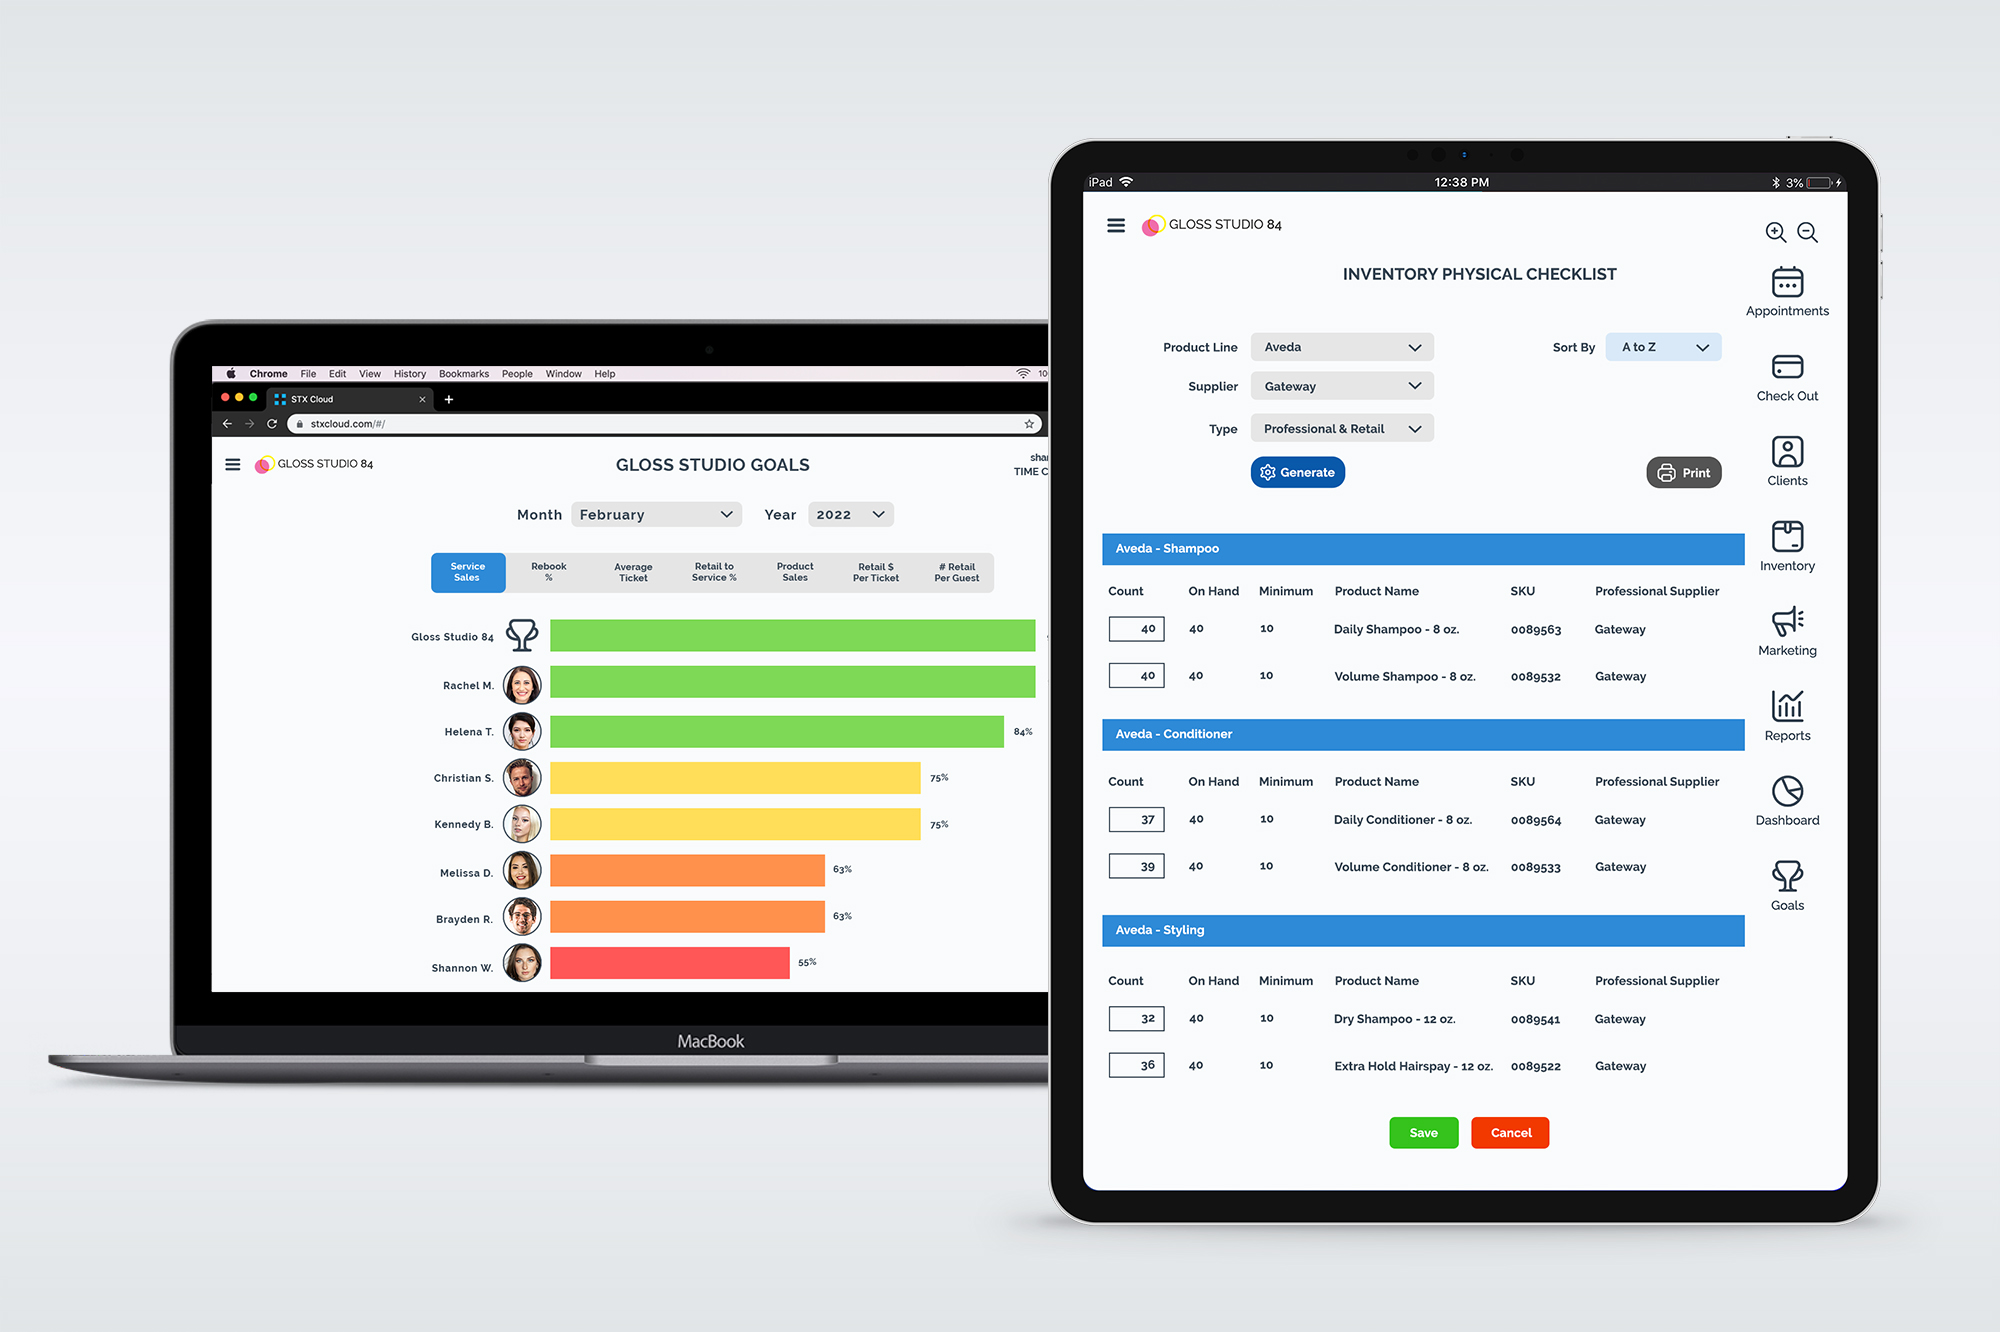 Know your business inside out with Inspire's dashboard, reporting, and goal setting. With over 50 reports to choose from, you can keep track of everything from inventory to top clients to future forecasting. Set goals for your team and watch sales grow.